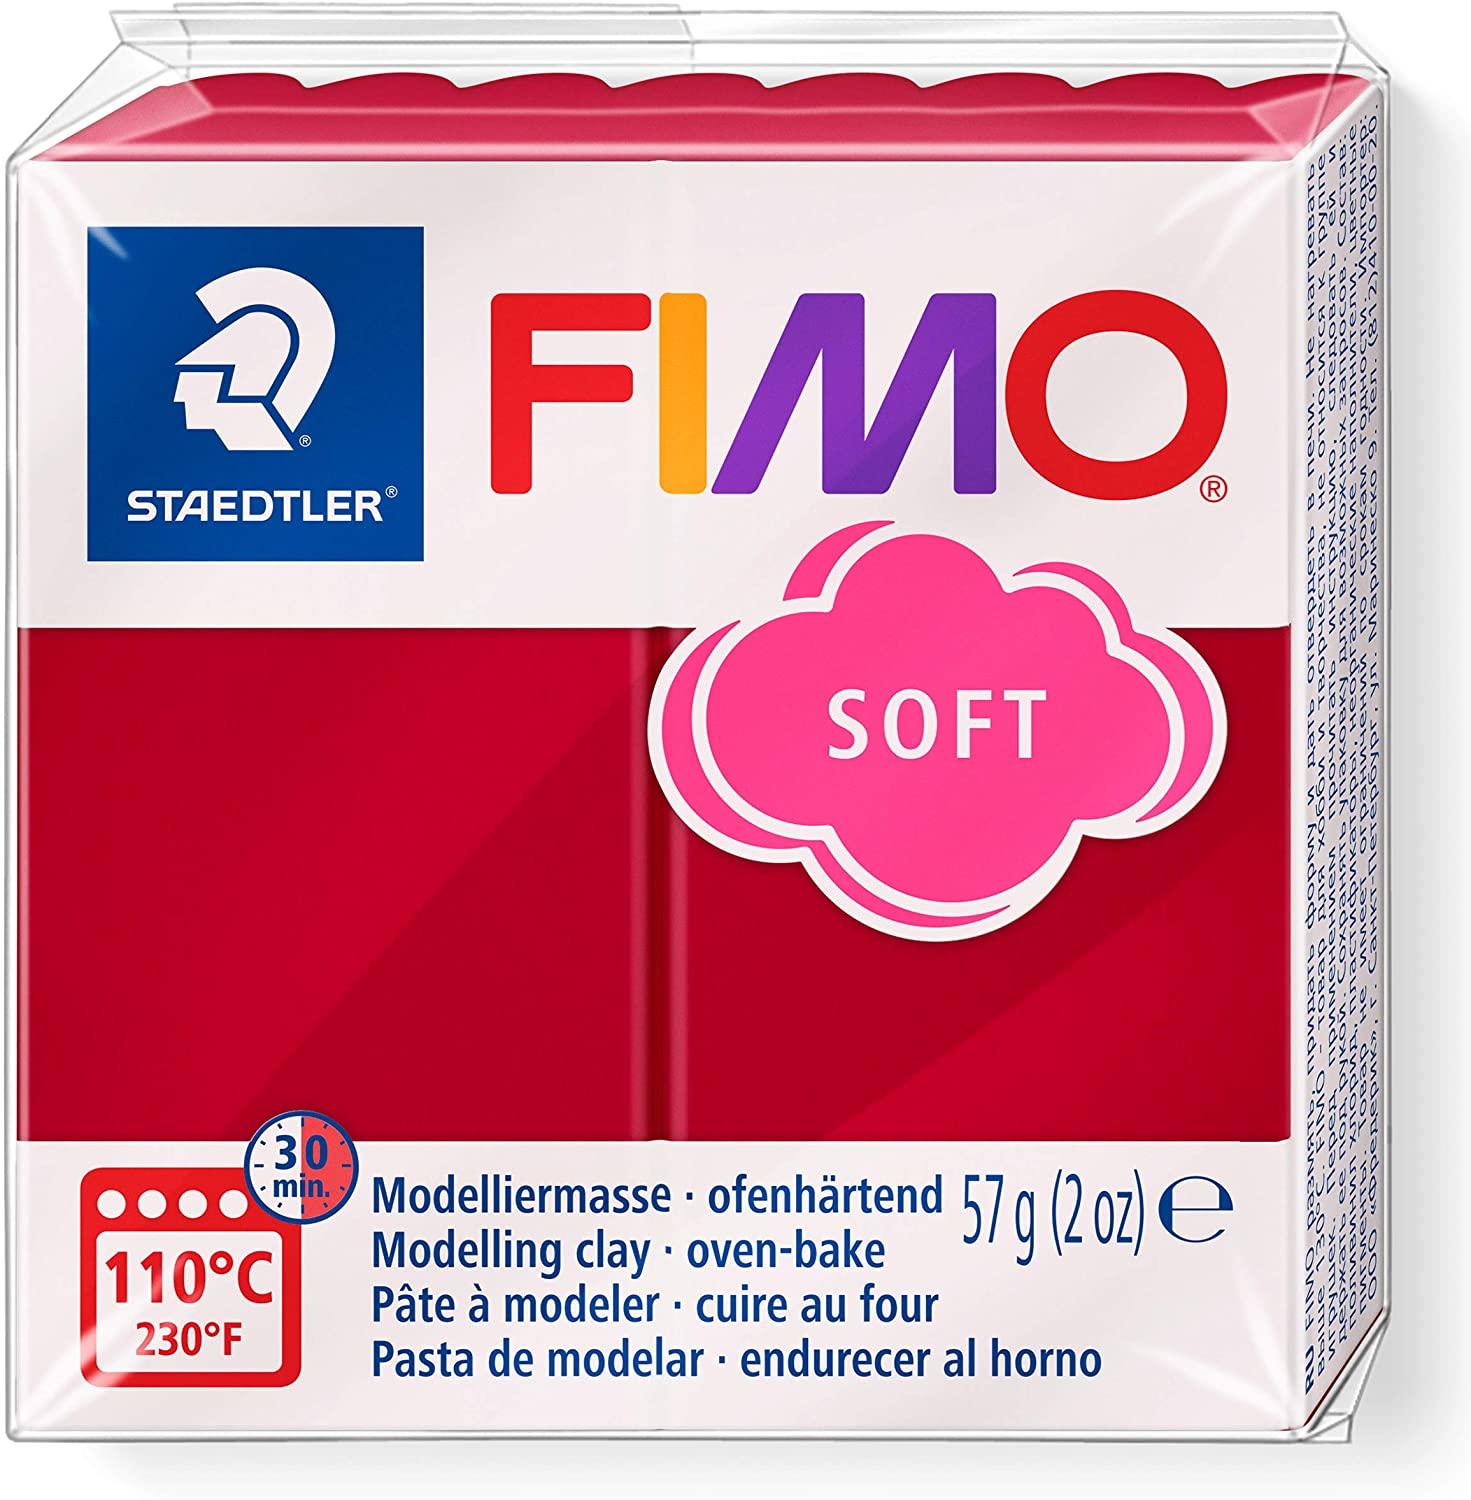 Fimo cherry red soft modelling clay in pack on white background.